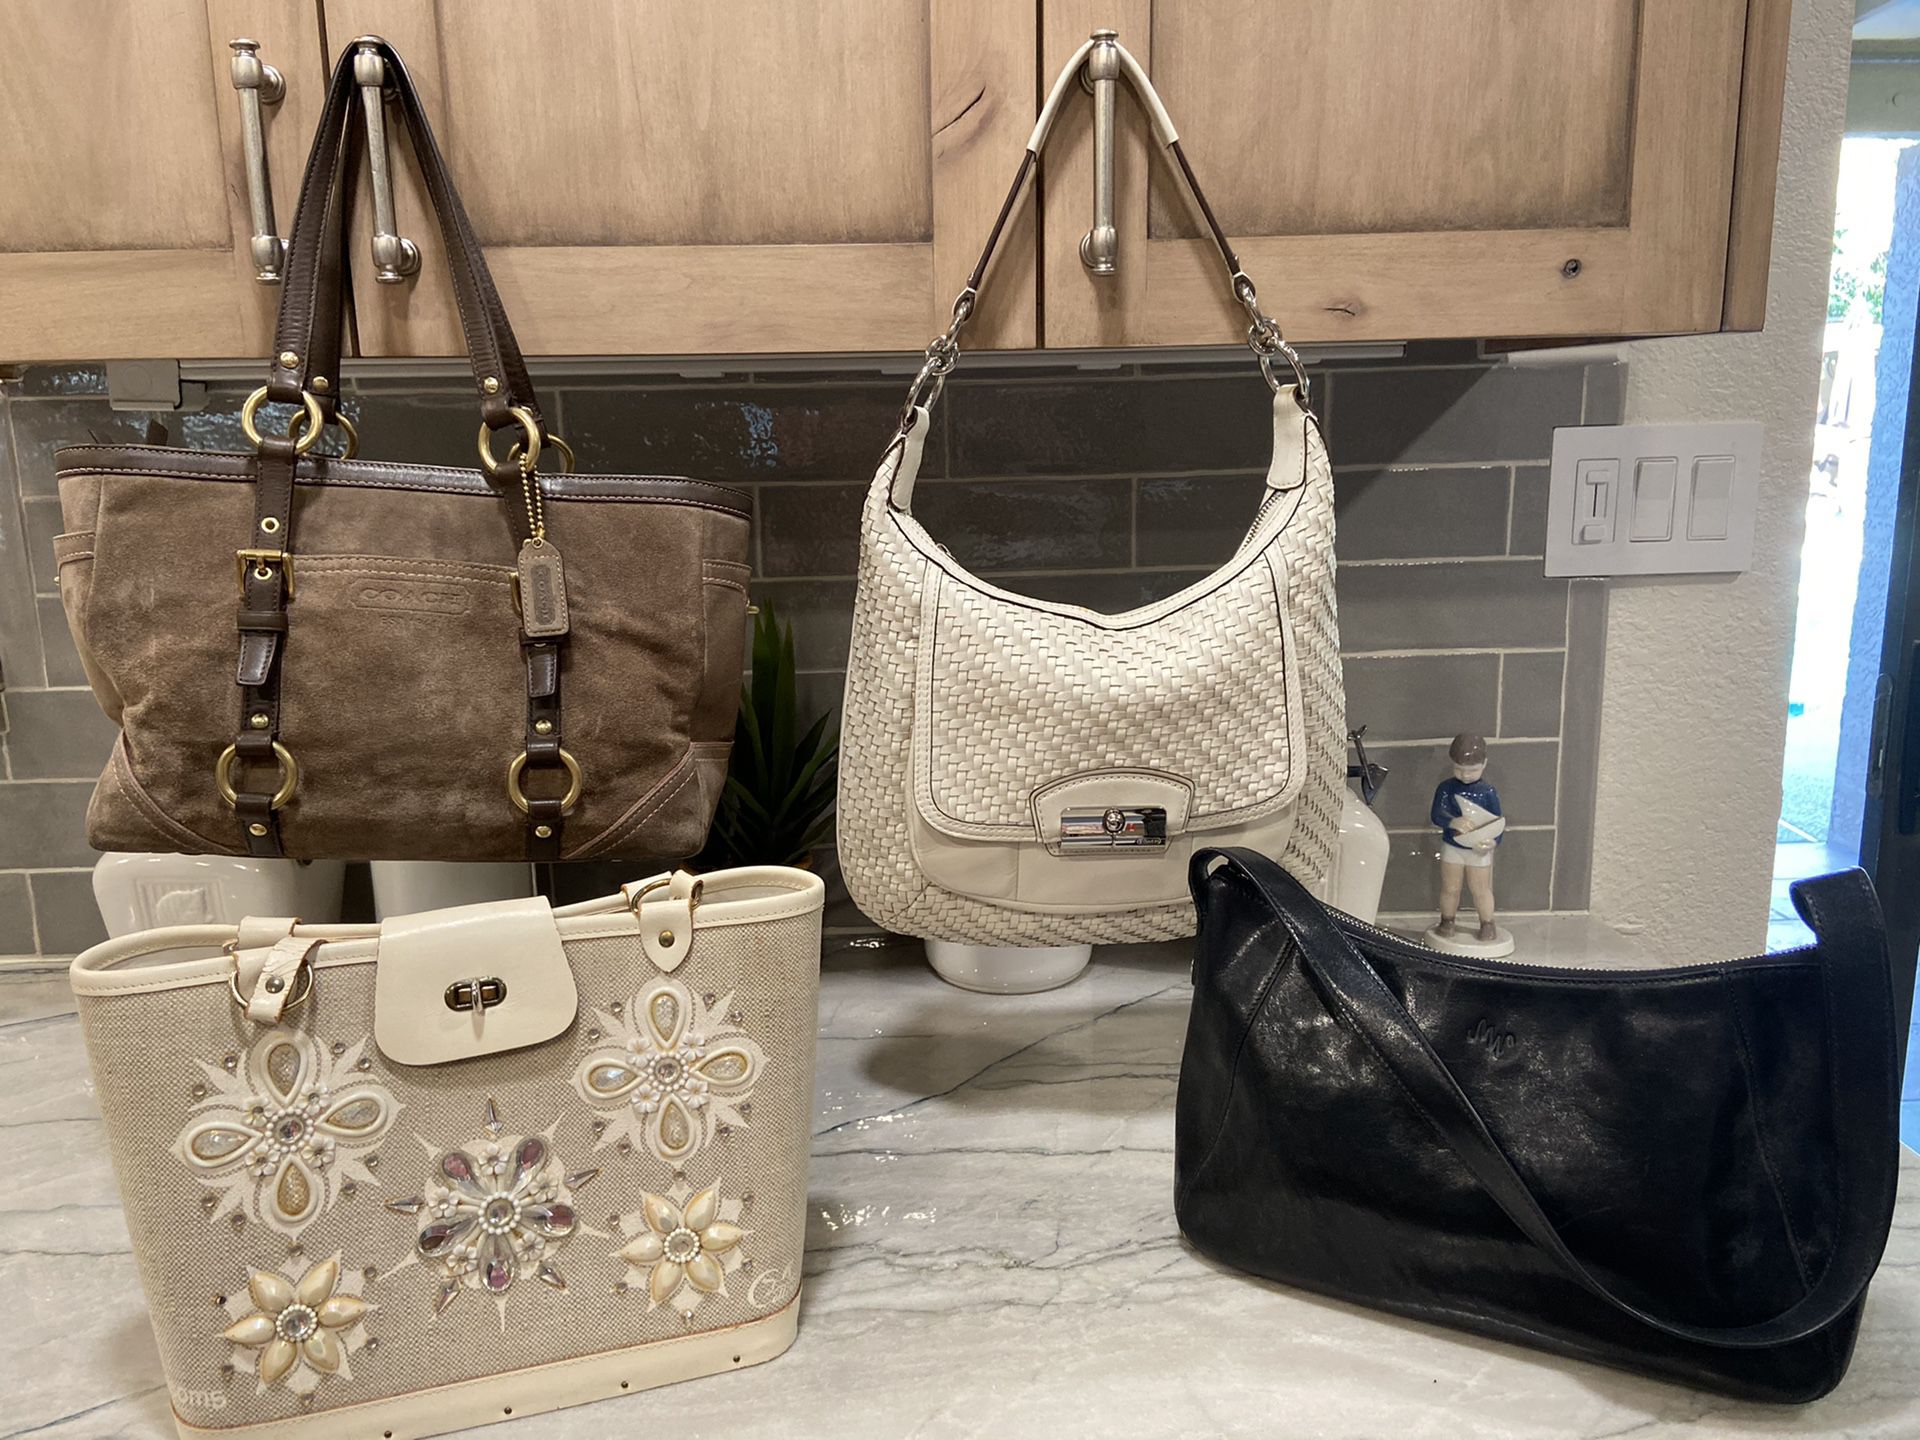 Coach purses and other authentic name brand handbags